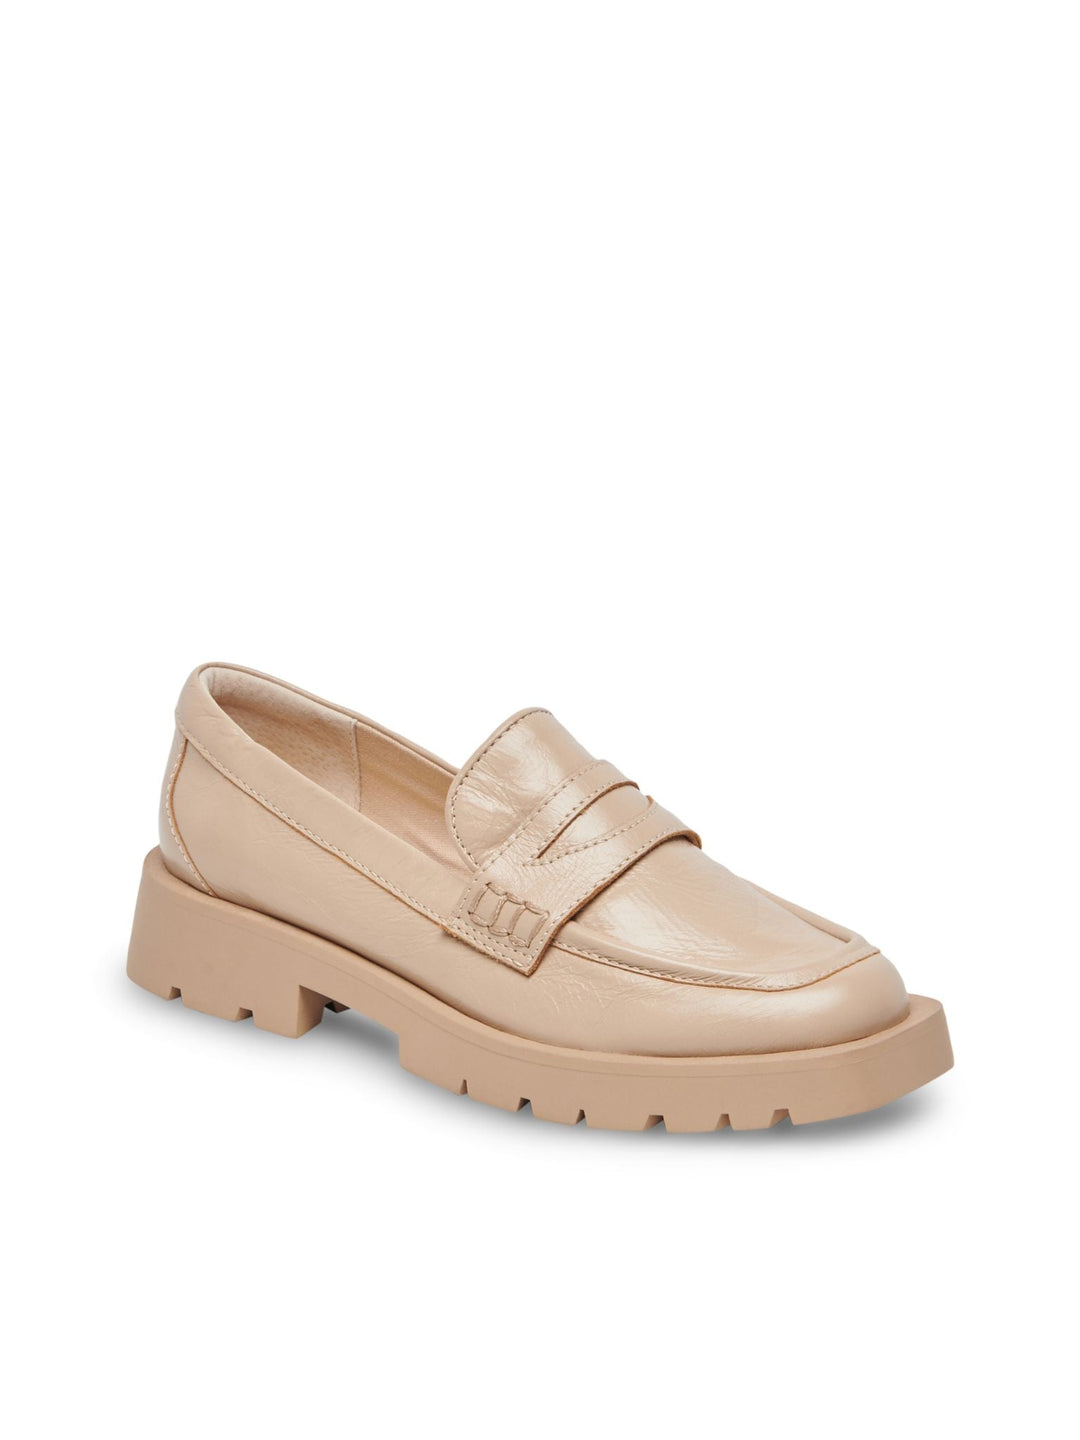 Loafers – Leela and Lavender